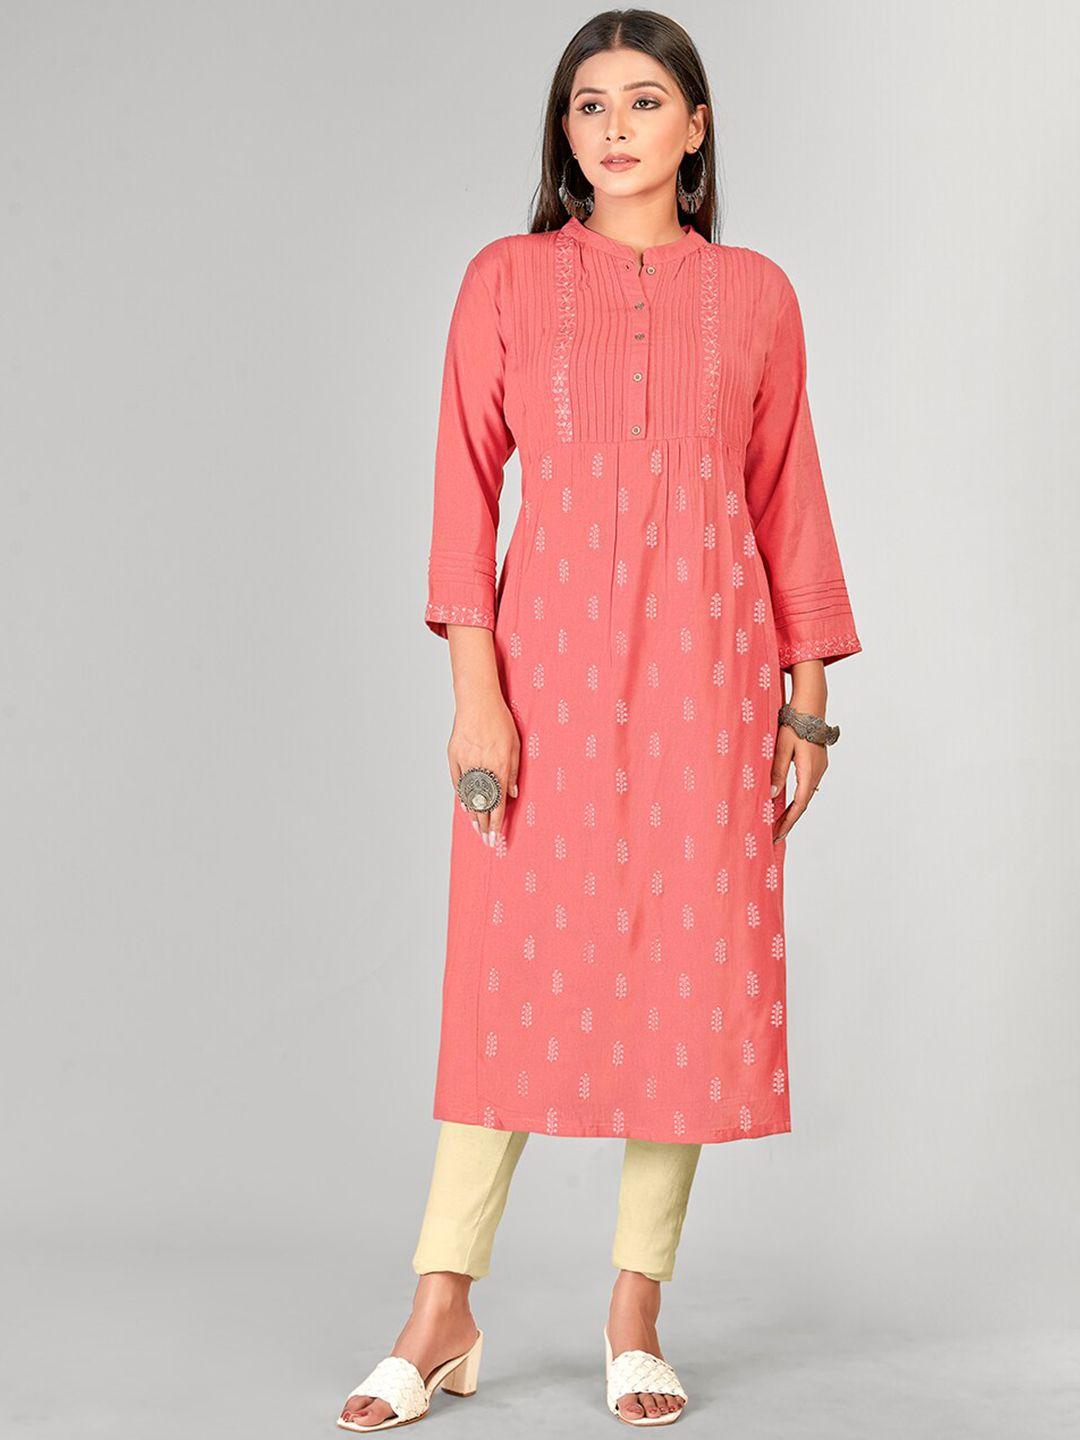 nh kapdewala women red floral printed pure cotton kurta with trousers